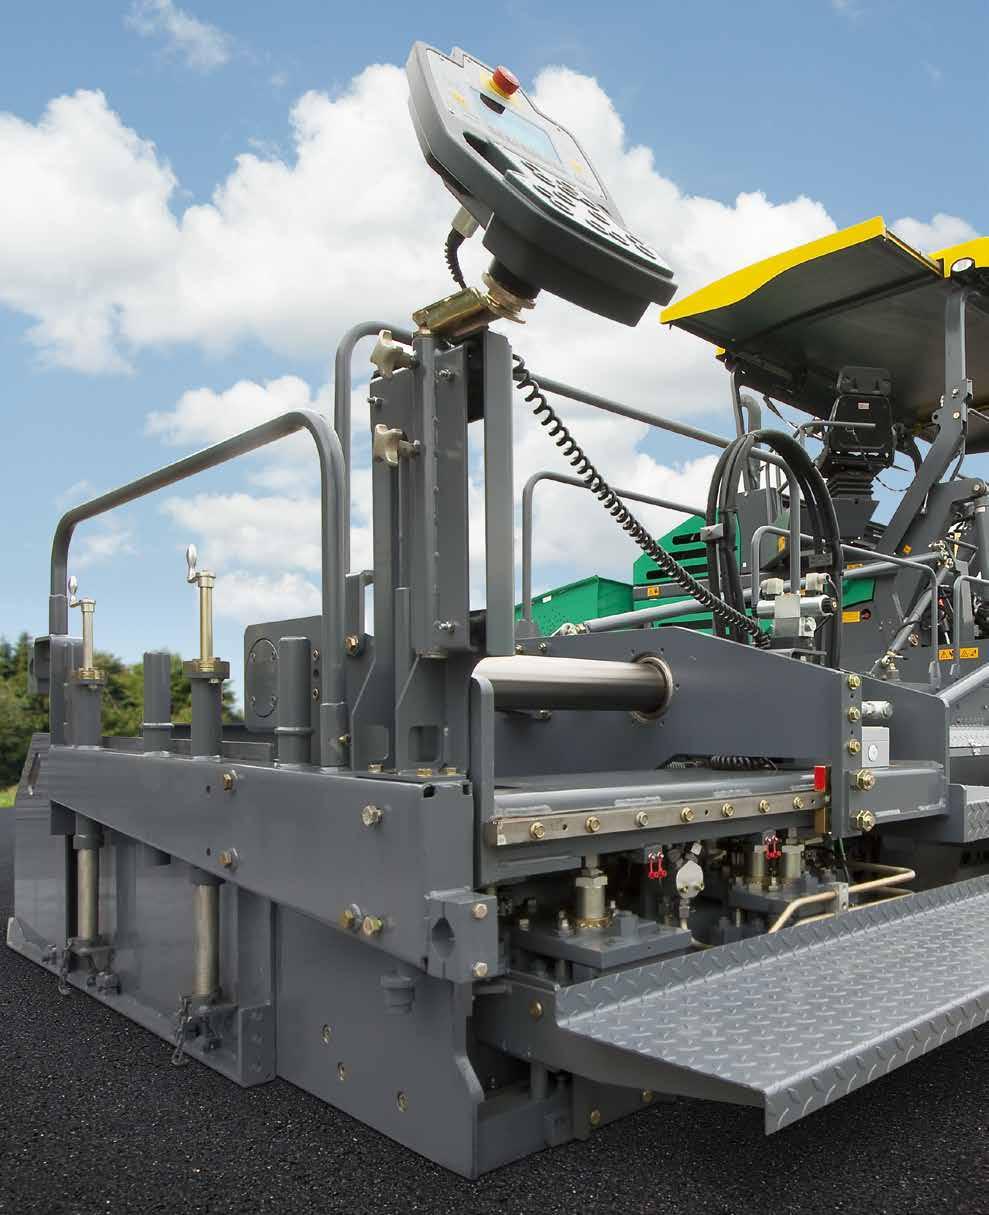 Their fields of application are enhanced by VÖGELE hydraulic bolt-on extensions which offer the advantage of an infinitely variable pave width within the range of 1.5m.